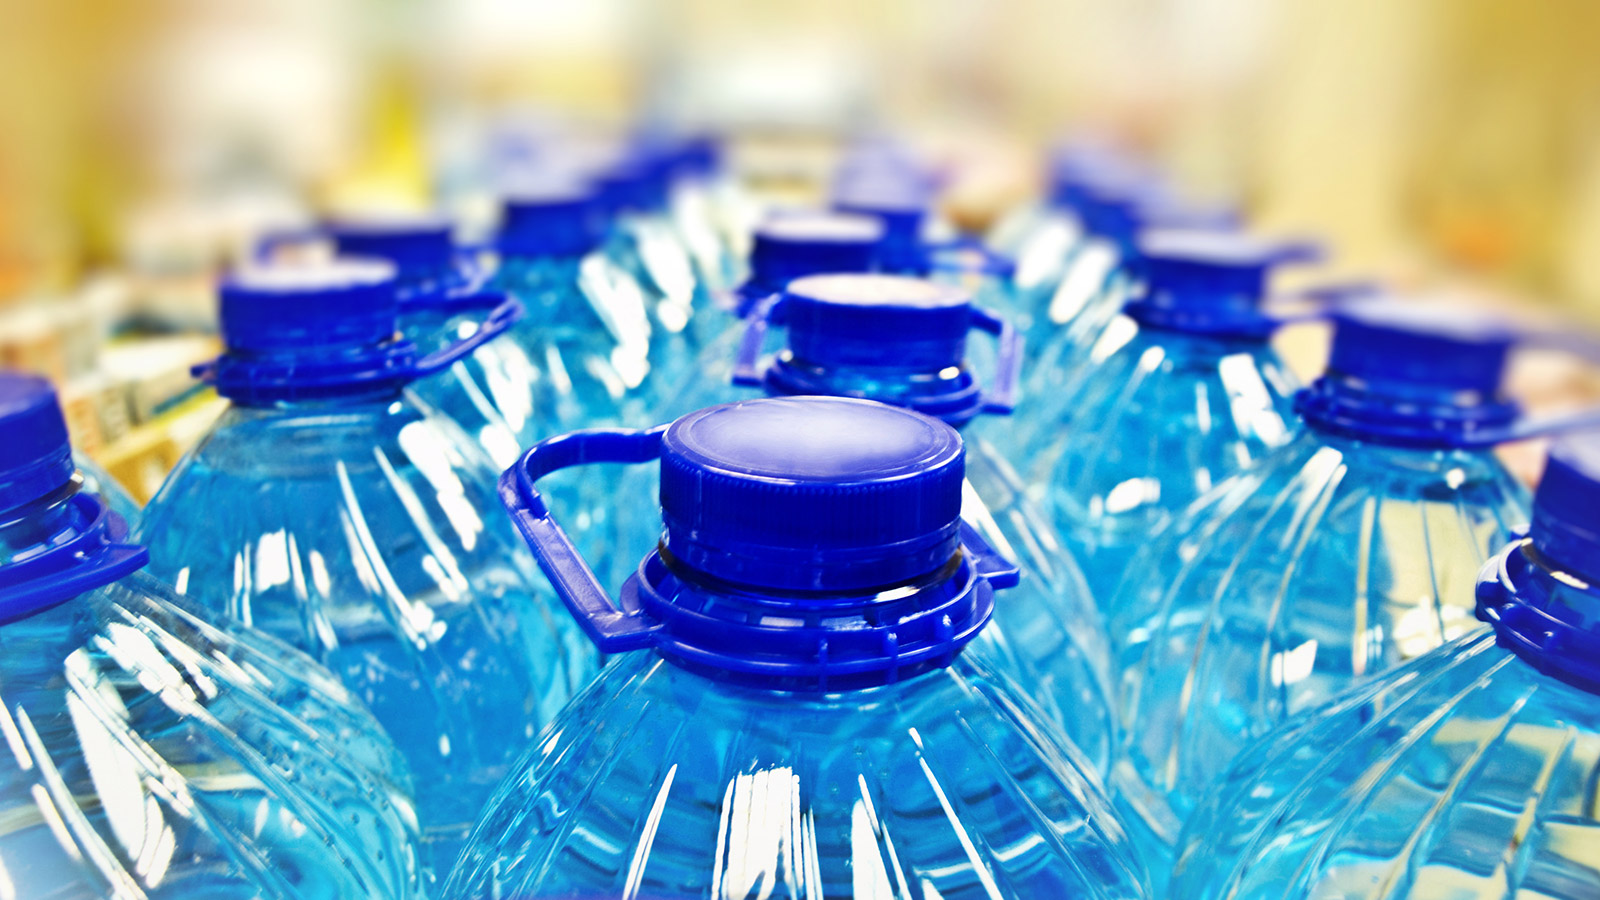 Plastic water bottle ban leads to unexpected results | Grist